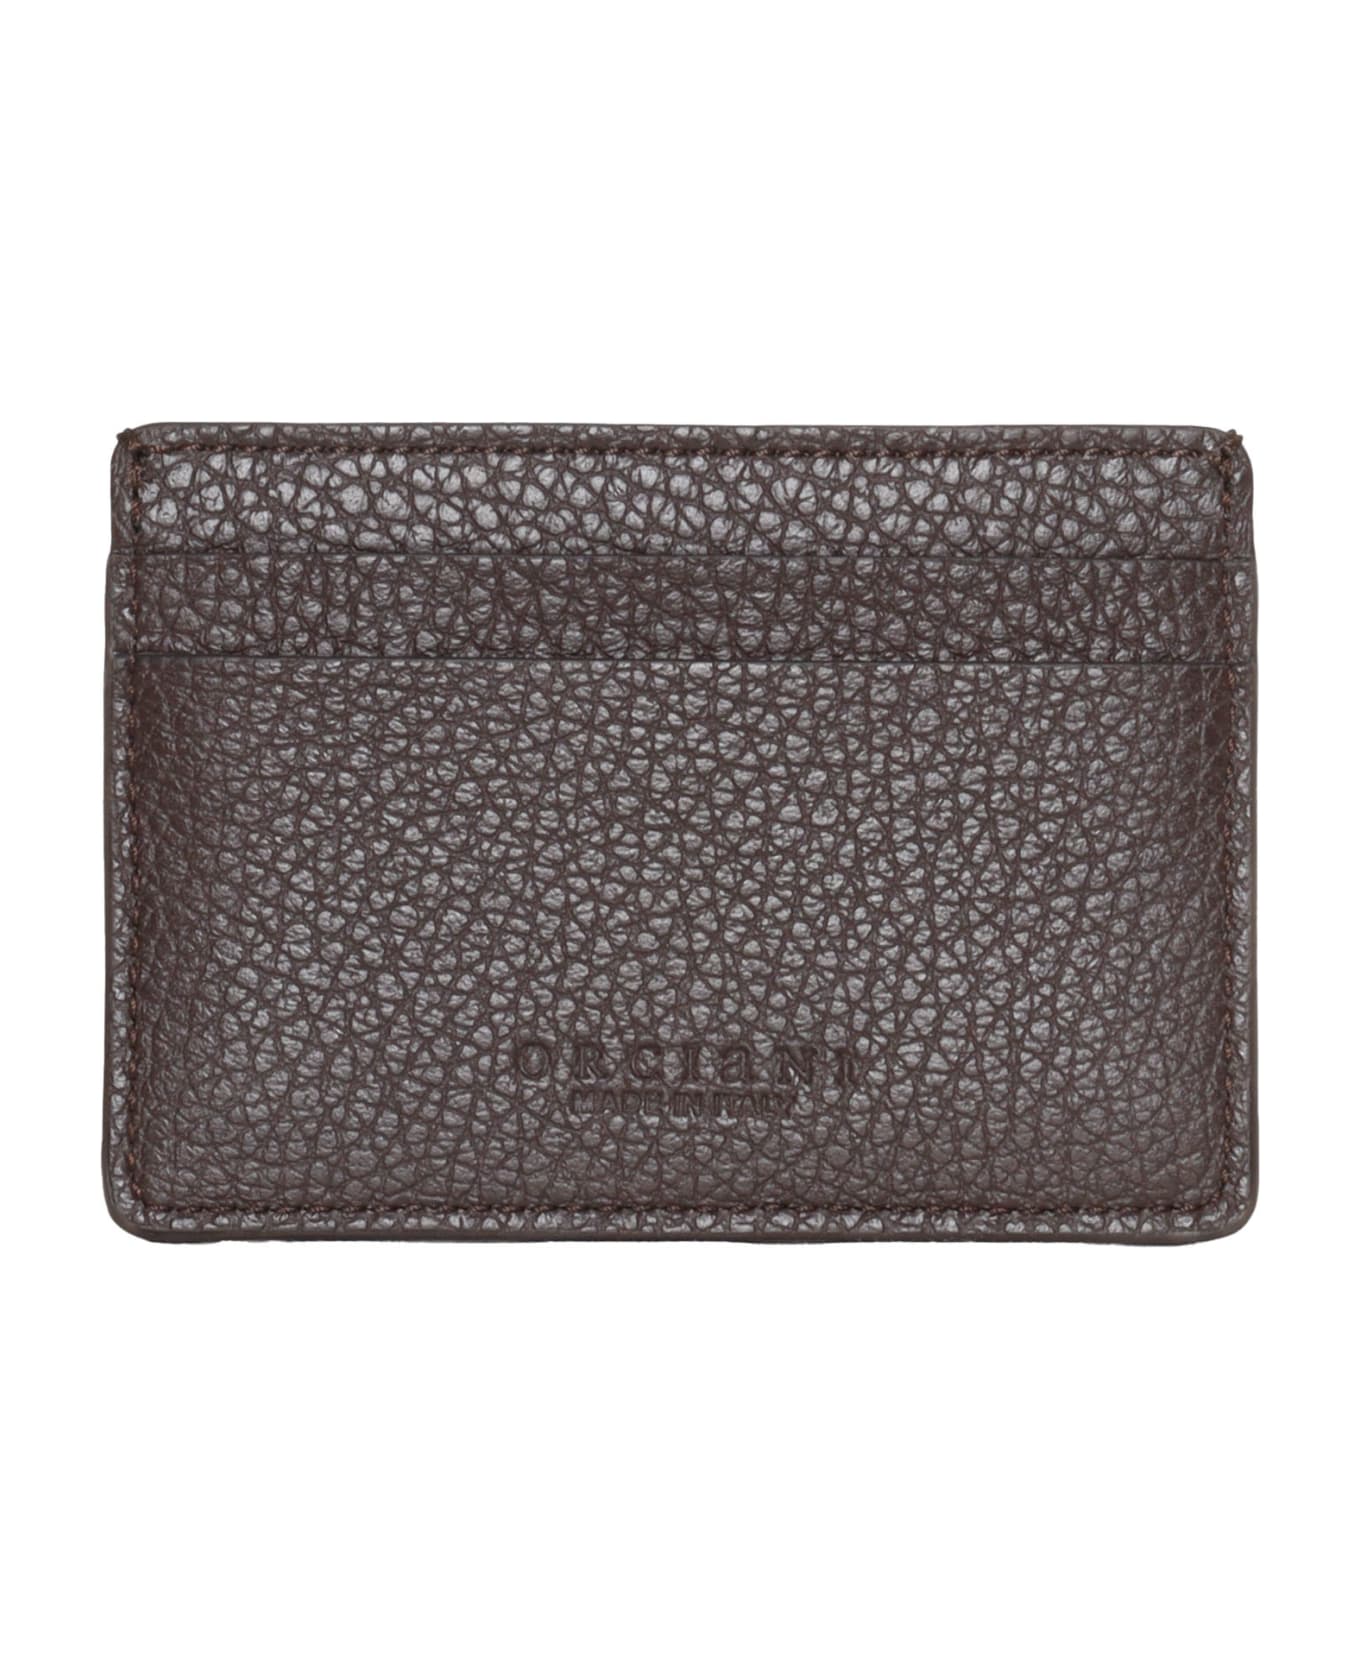 Orciani Micron Card Holder - BROWN 財布